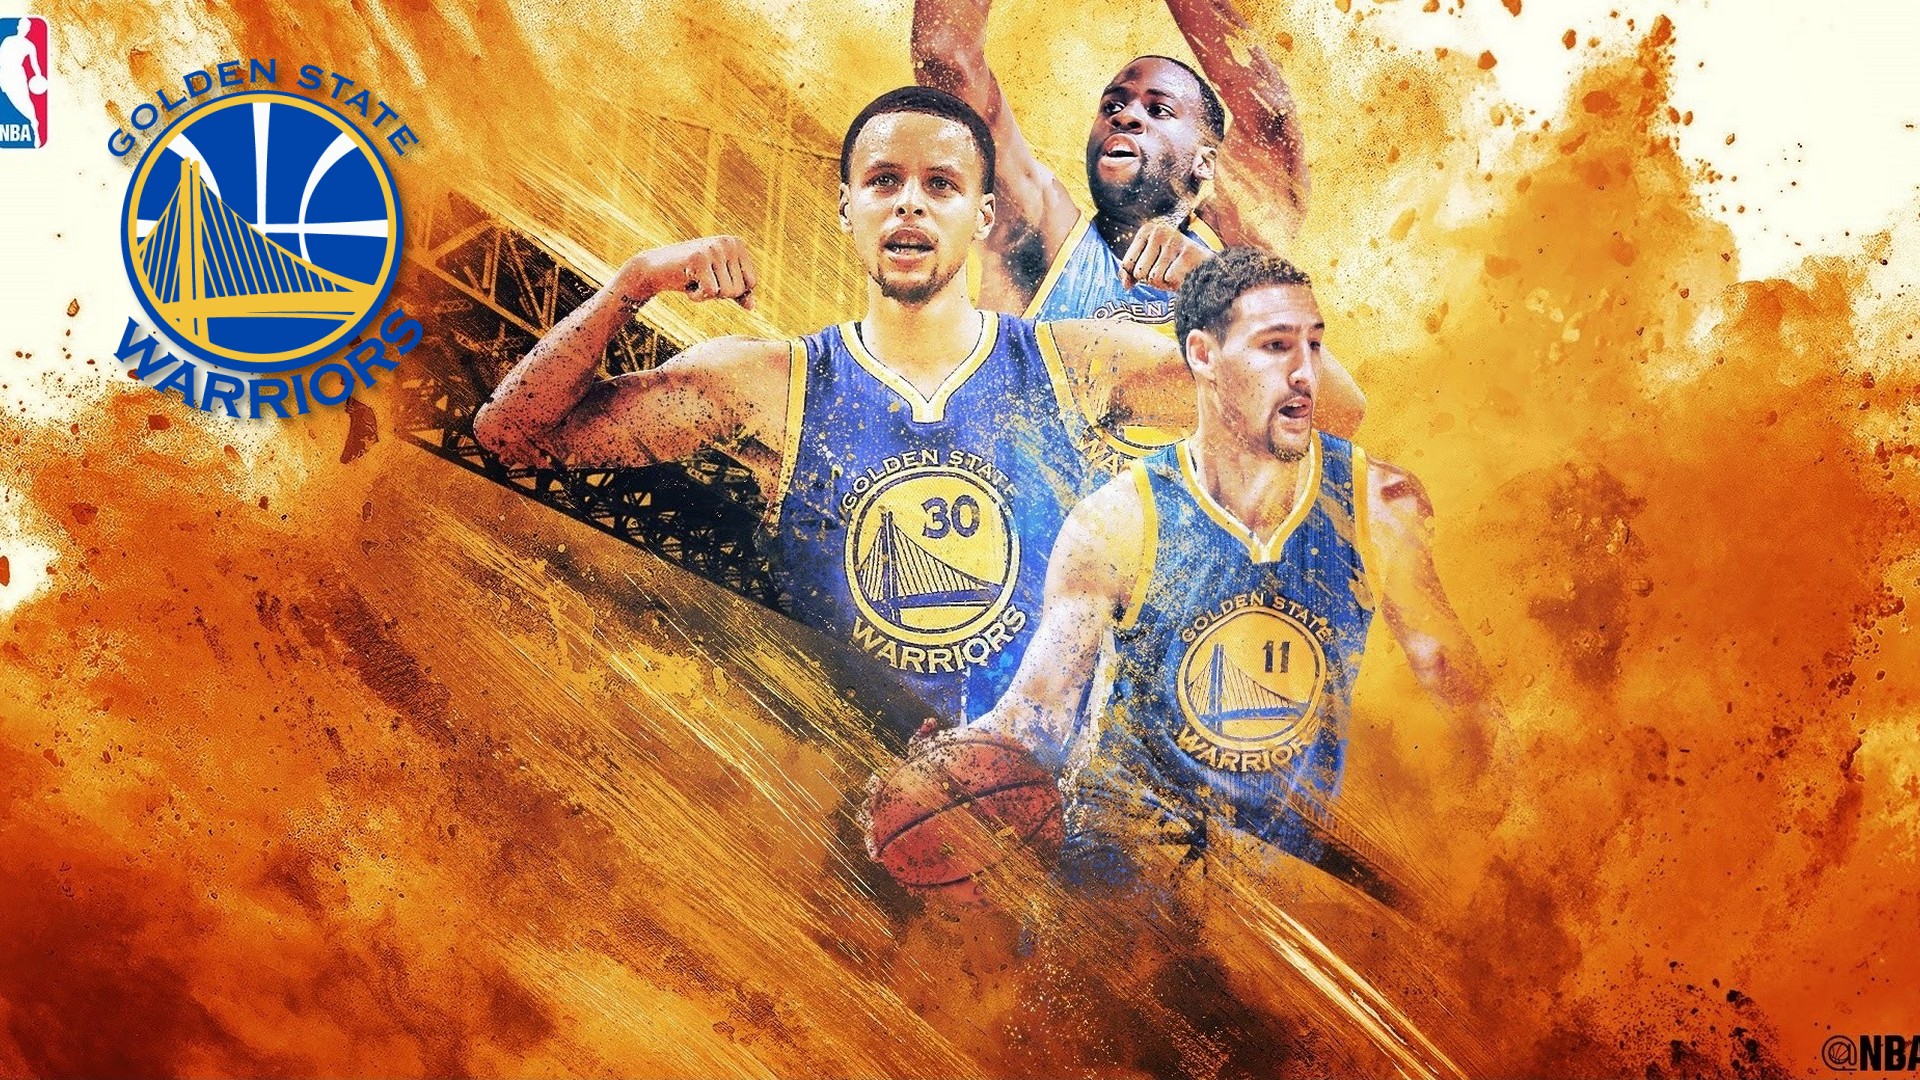 Windows Wallpaper Stephen Curry with image dimensions 1920x1080 pixel. You can make this wallpaper for your Desktop Computer Backgrounds, Windows or Mac Screensavers, iPhone Lock screen, Tablet or Android and another Mobile Phone device